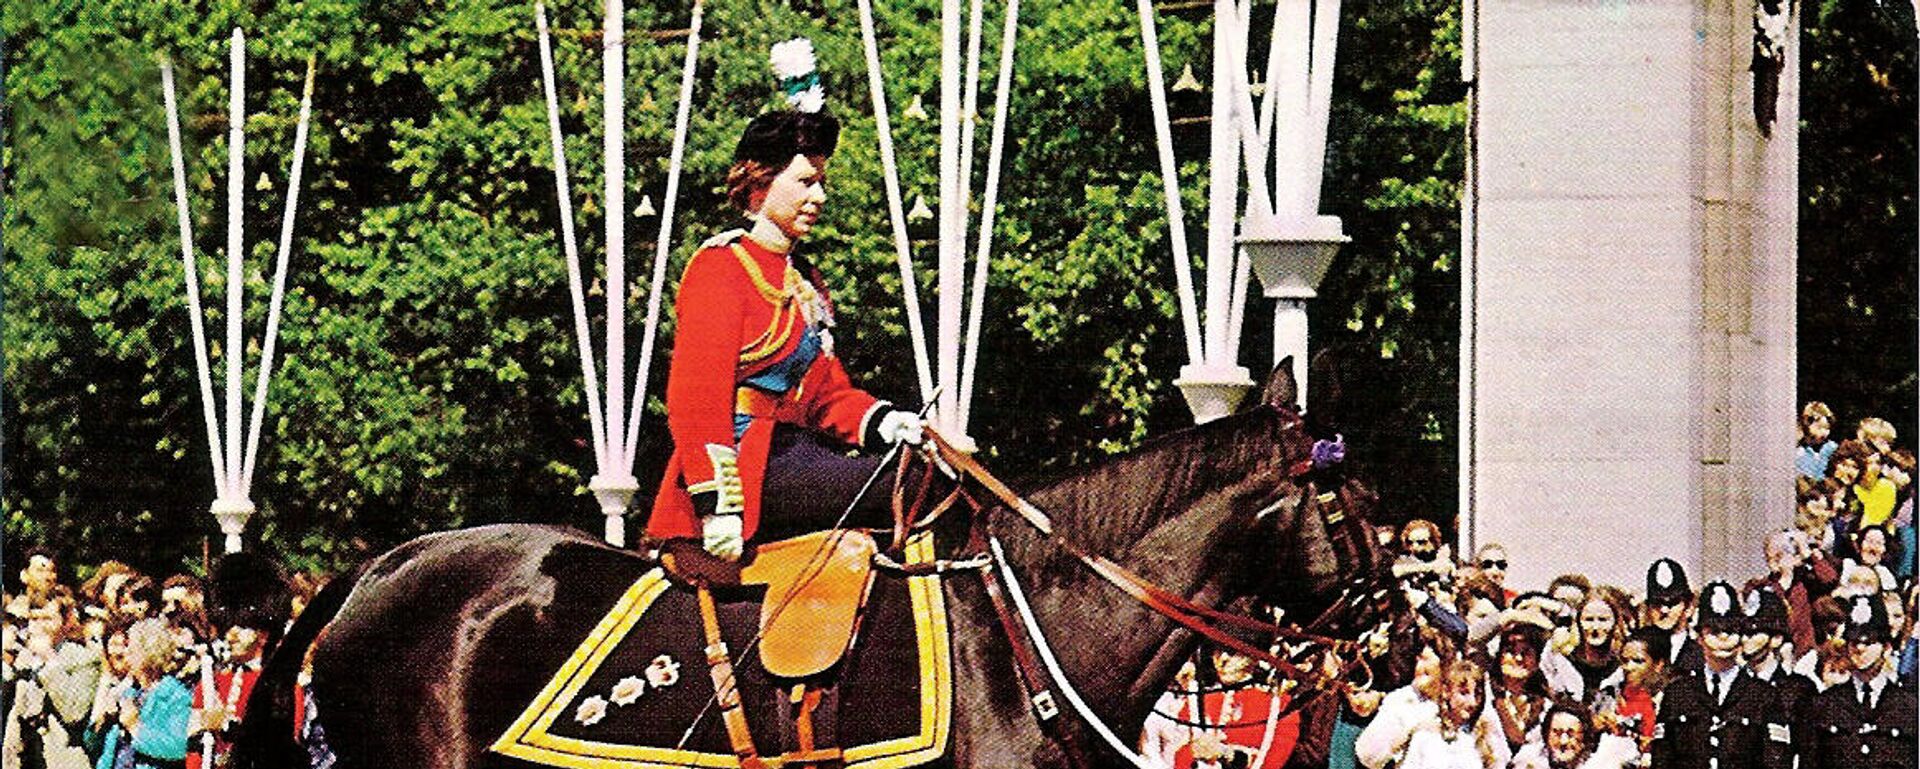 HM Queen riding her famous horse Burmese, given to her by the Royal Canadian Mounted Police in 1969 - Sputnik International, 1920, 28.10.2021